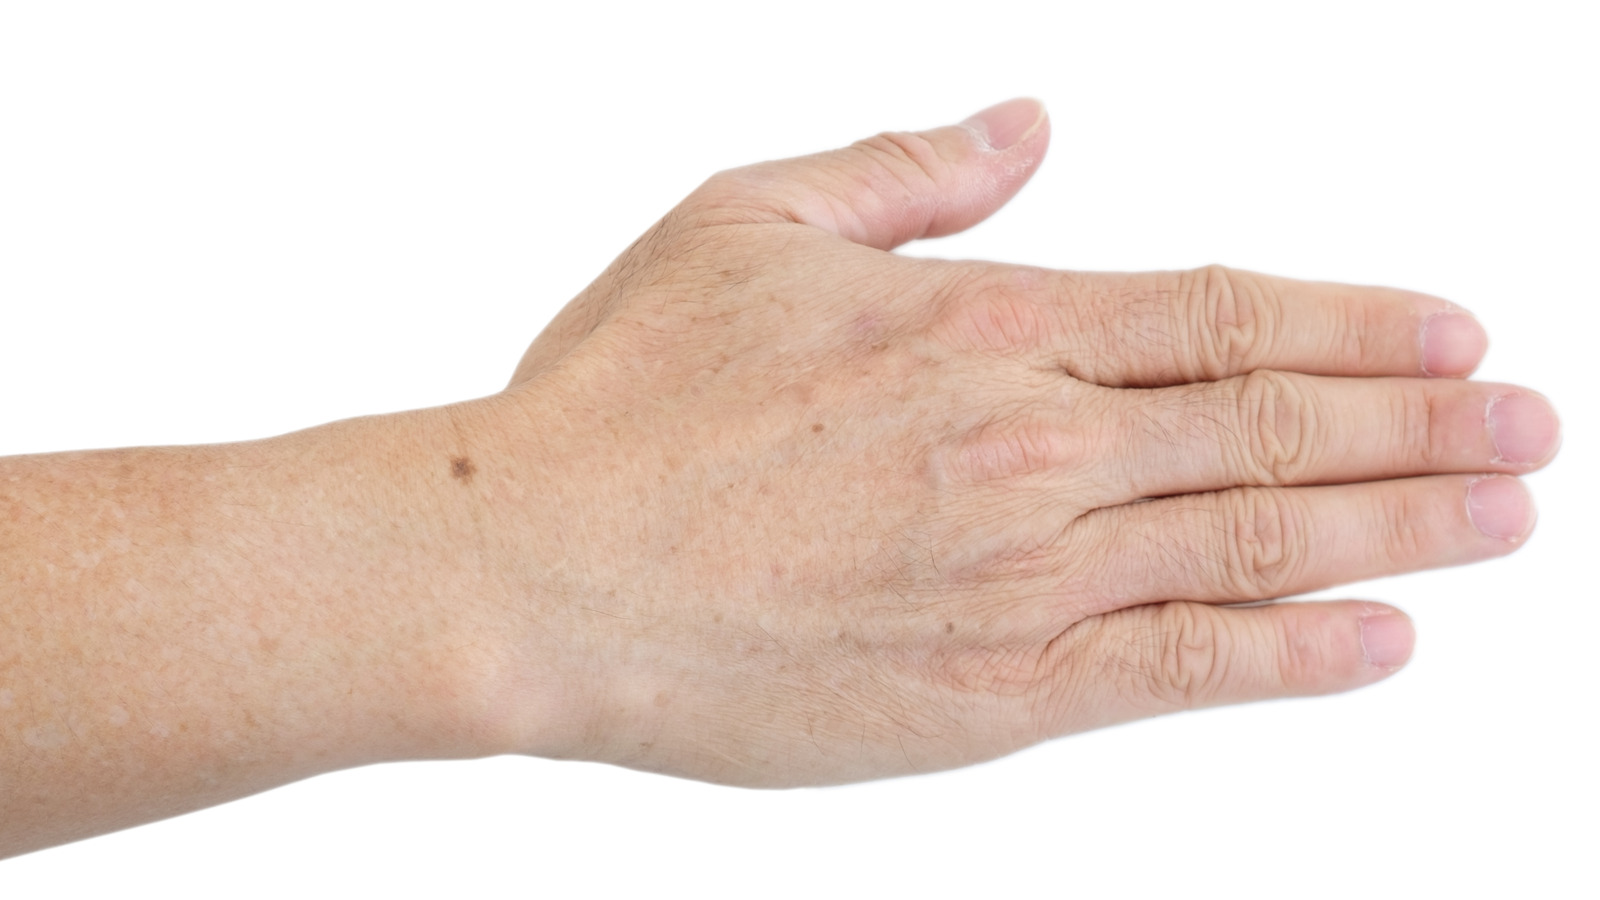 How To Deal With Darkening Age Spots On Your Hands